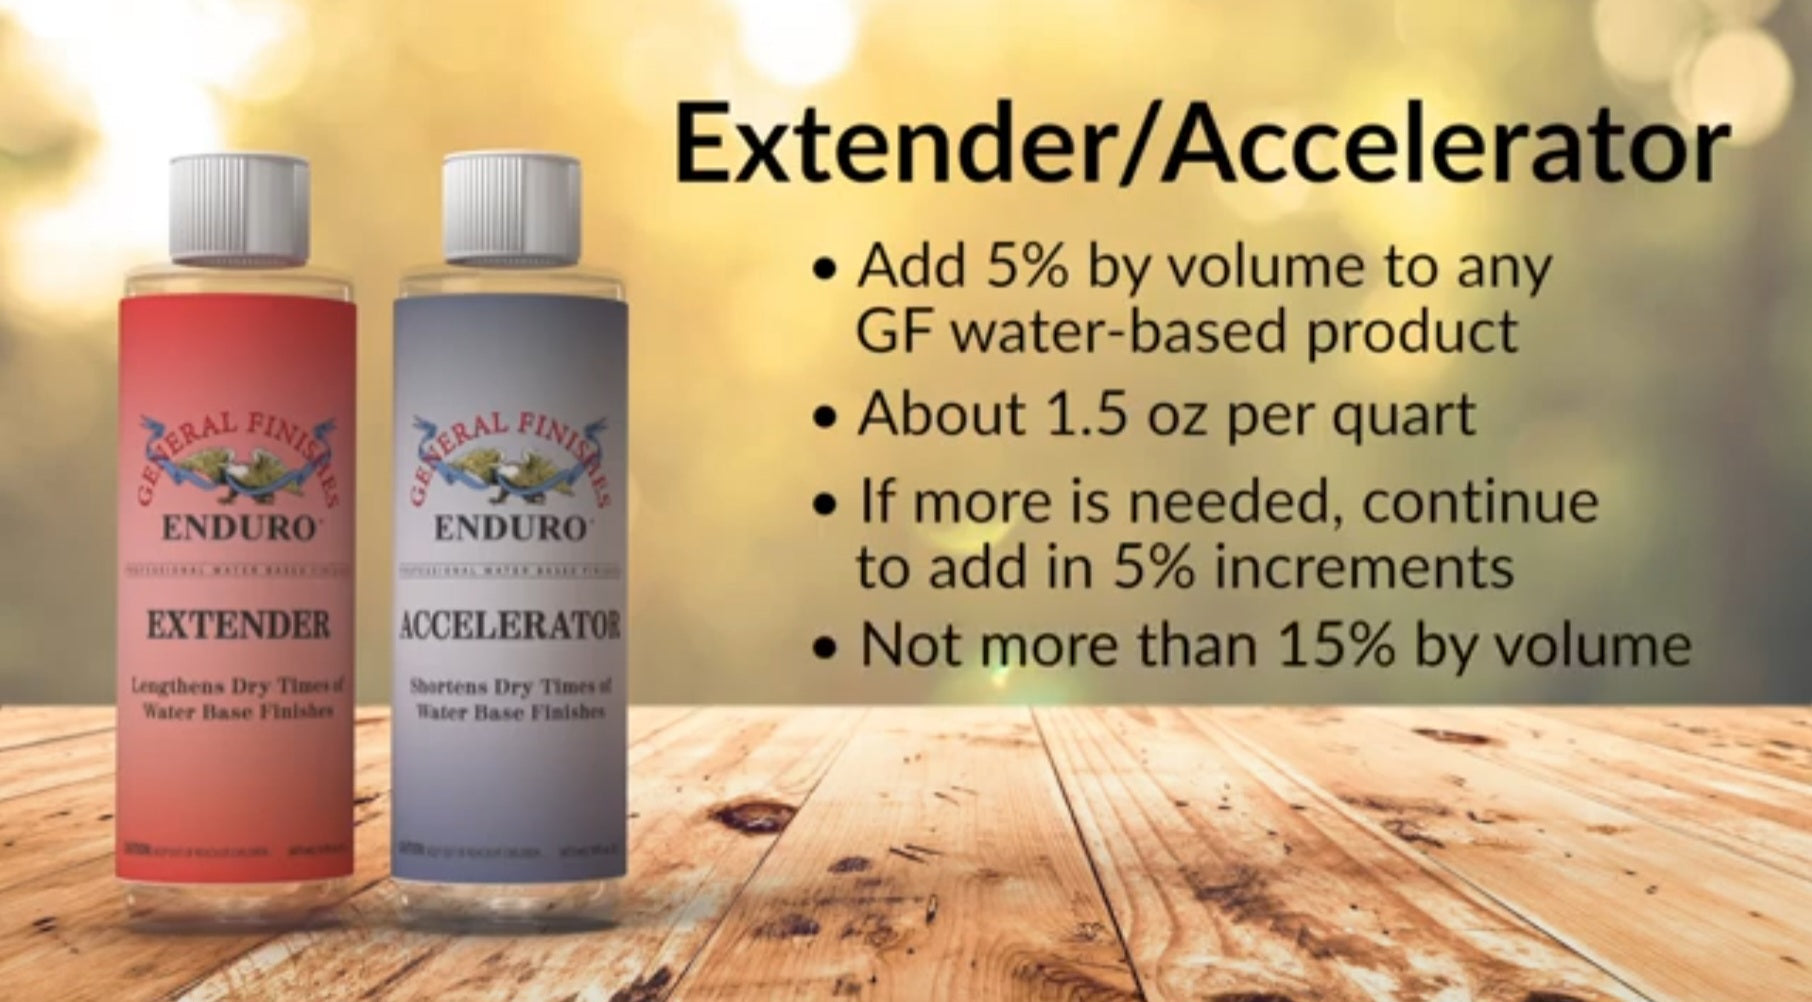 How much extender or accelerator to add to general finishes waterbased products